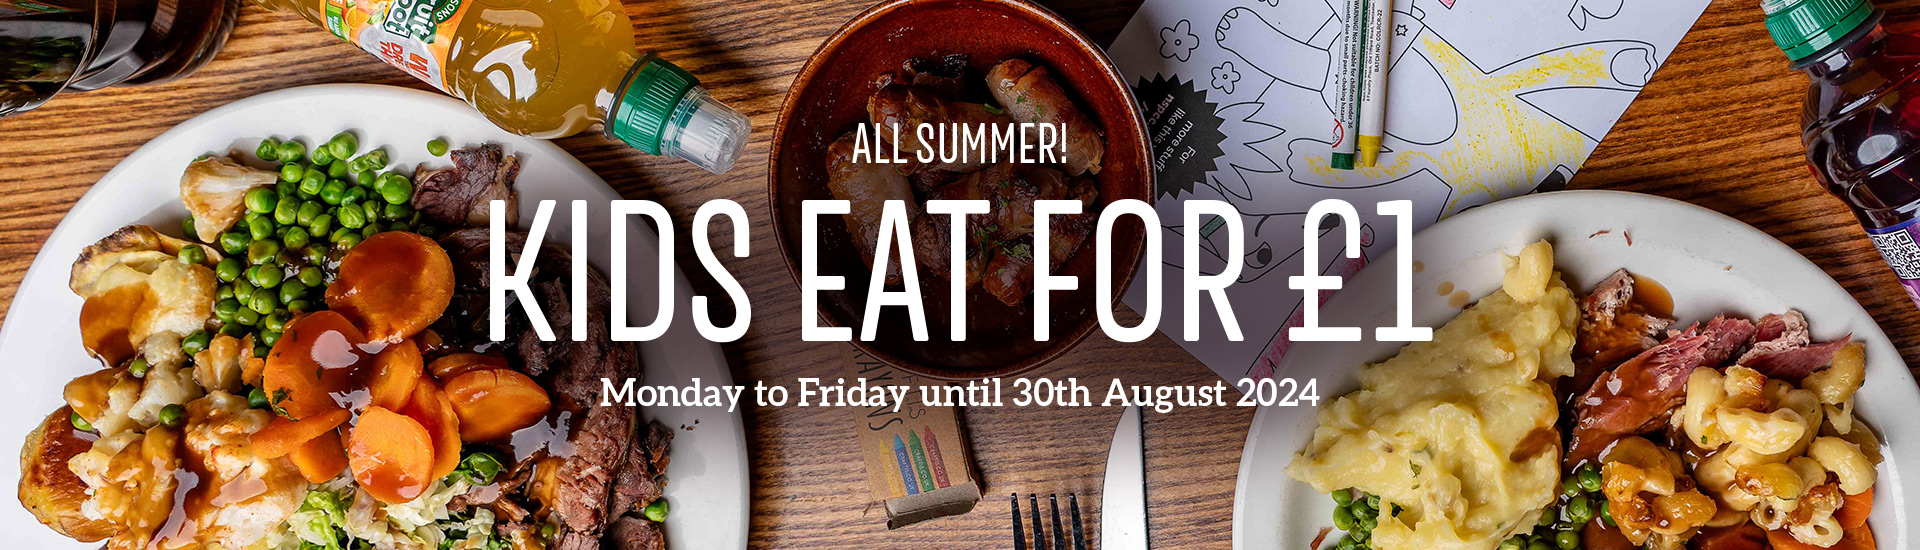 Kids Eat for £1 at Toby Carvery